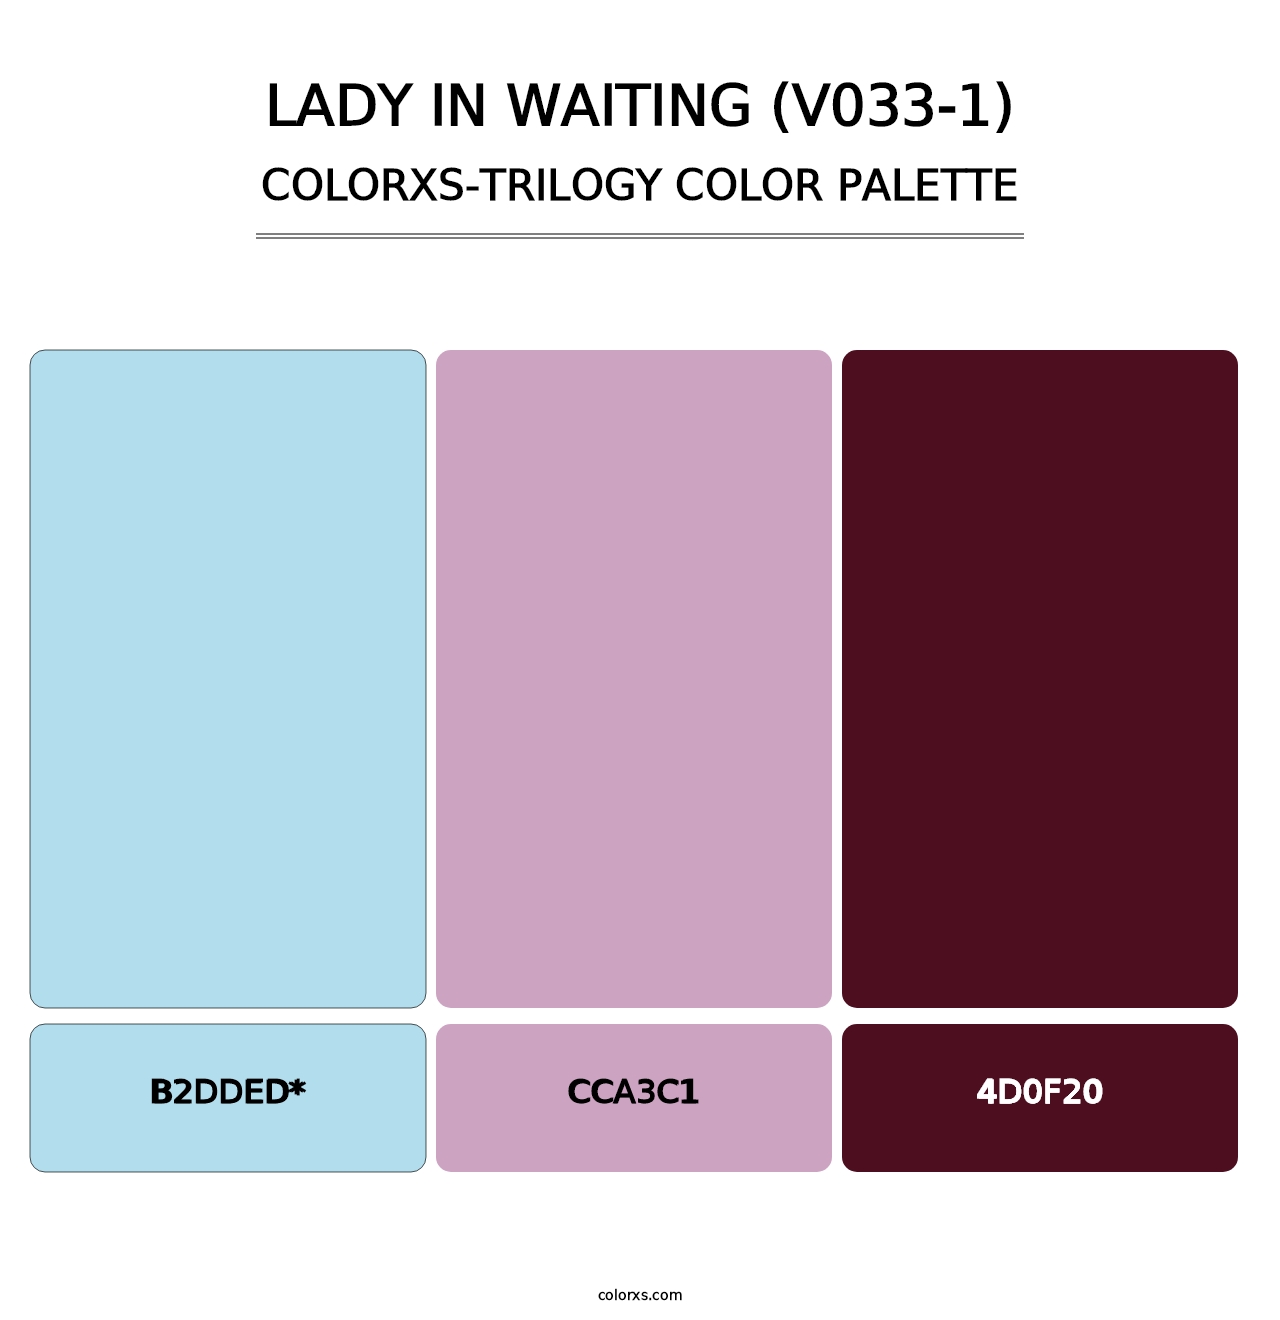 Lady in Waiting (V033-1) - Colorxs Trilogy Palette